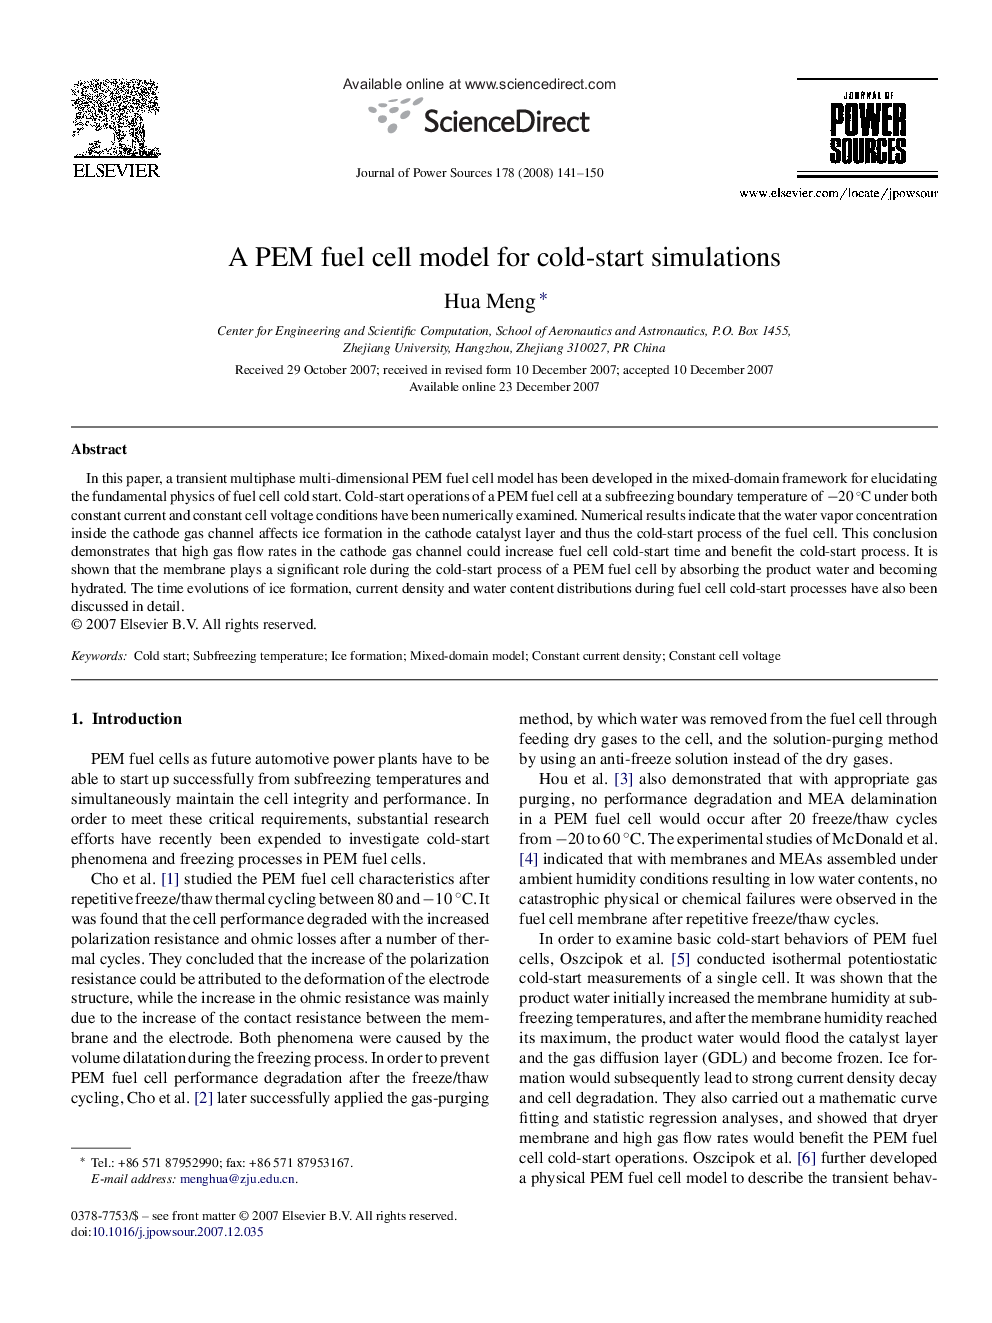 A PEM fuel cell model for cold-start simulations